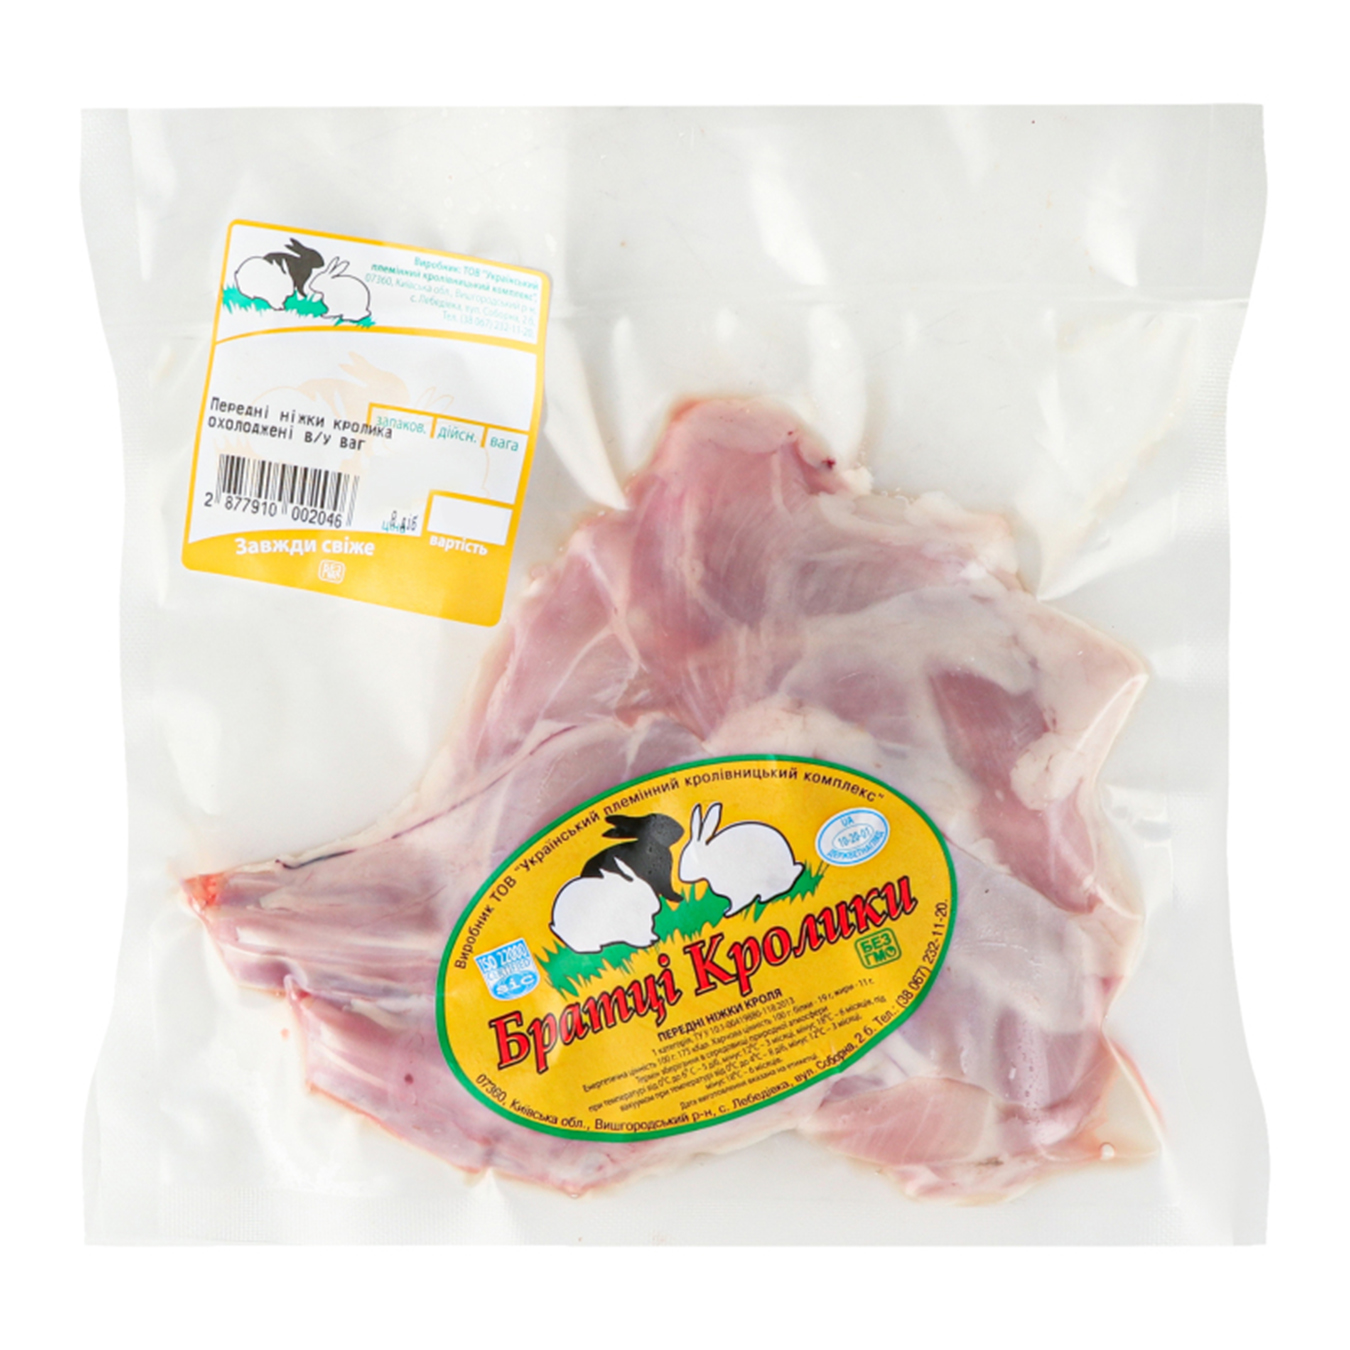 Brattsi Krolyky front legs of rabbit chilled 400-550 grams per package